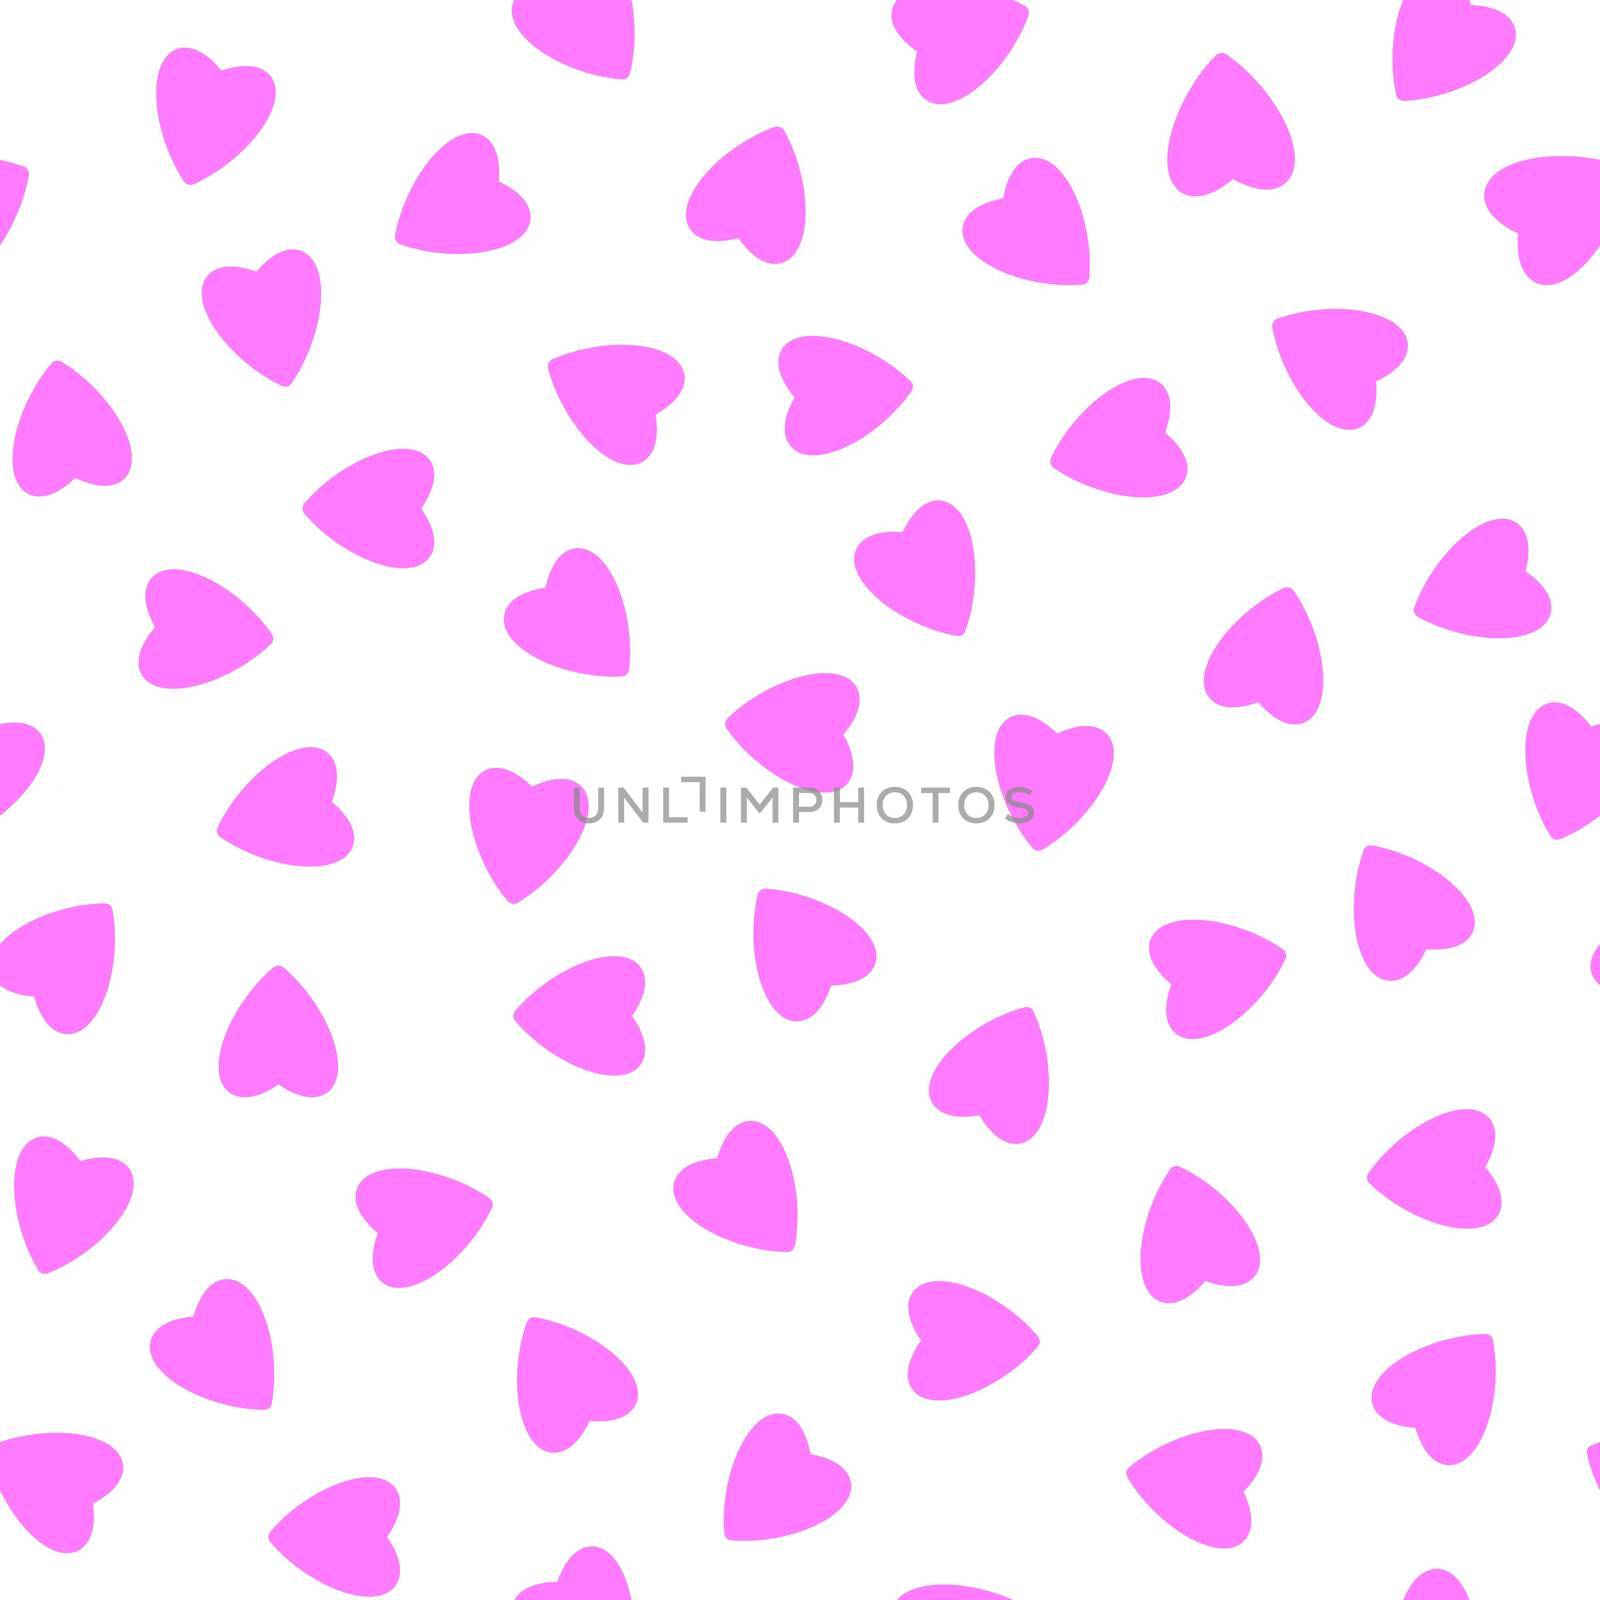 Simple hearts seamless pattern,endless chaotic texture made of tiny heart silhouettes.Valentines,mothers day background.Great for Easter,wedding,scrapbook,gift wrapping paper,textiles.Lilac on white.